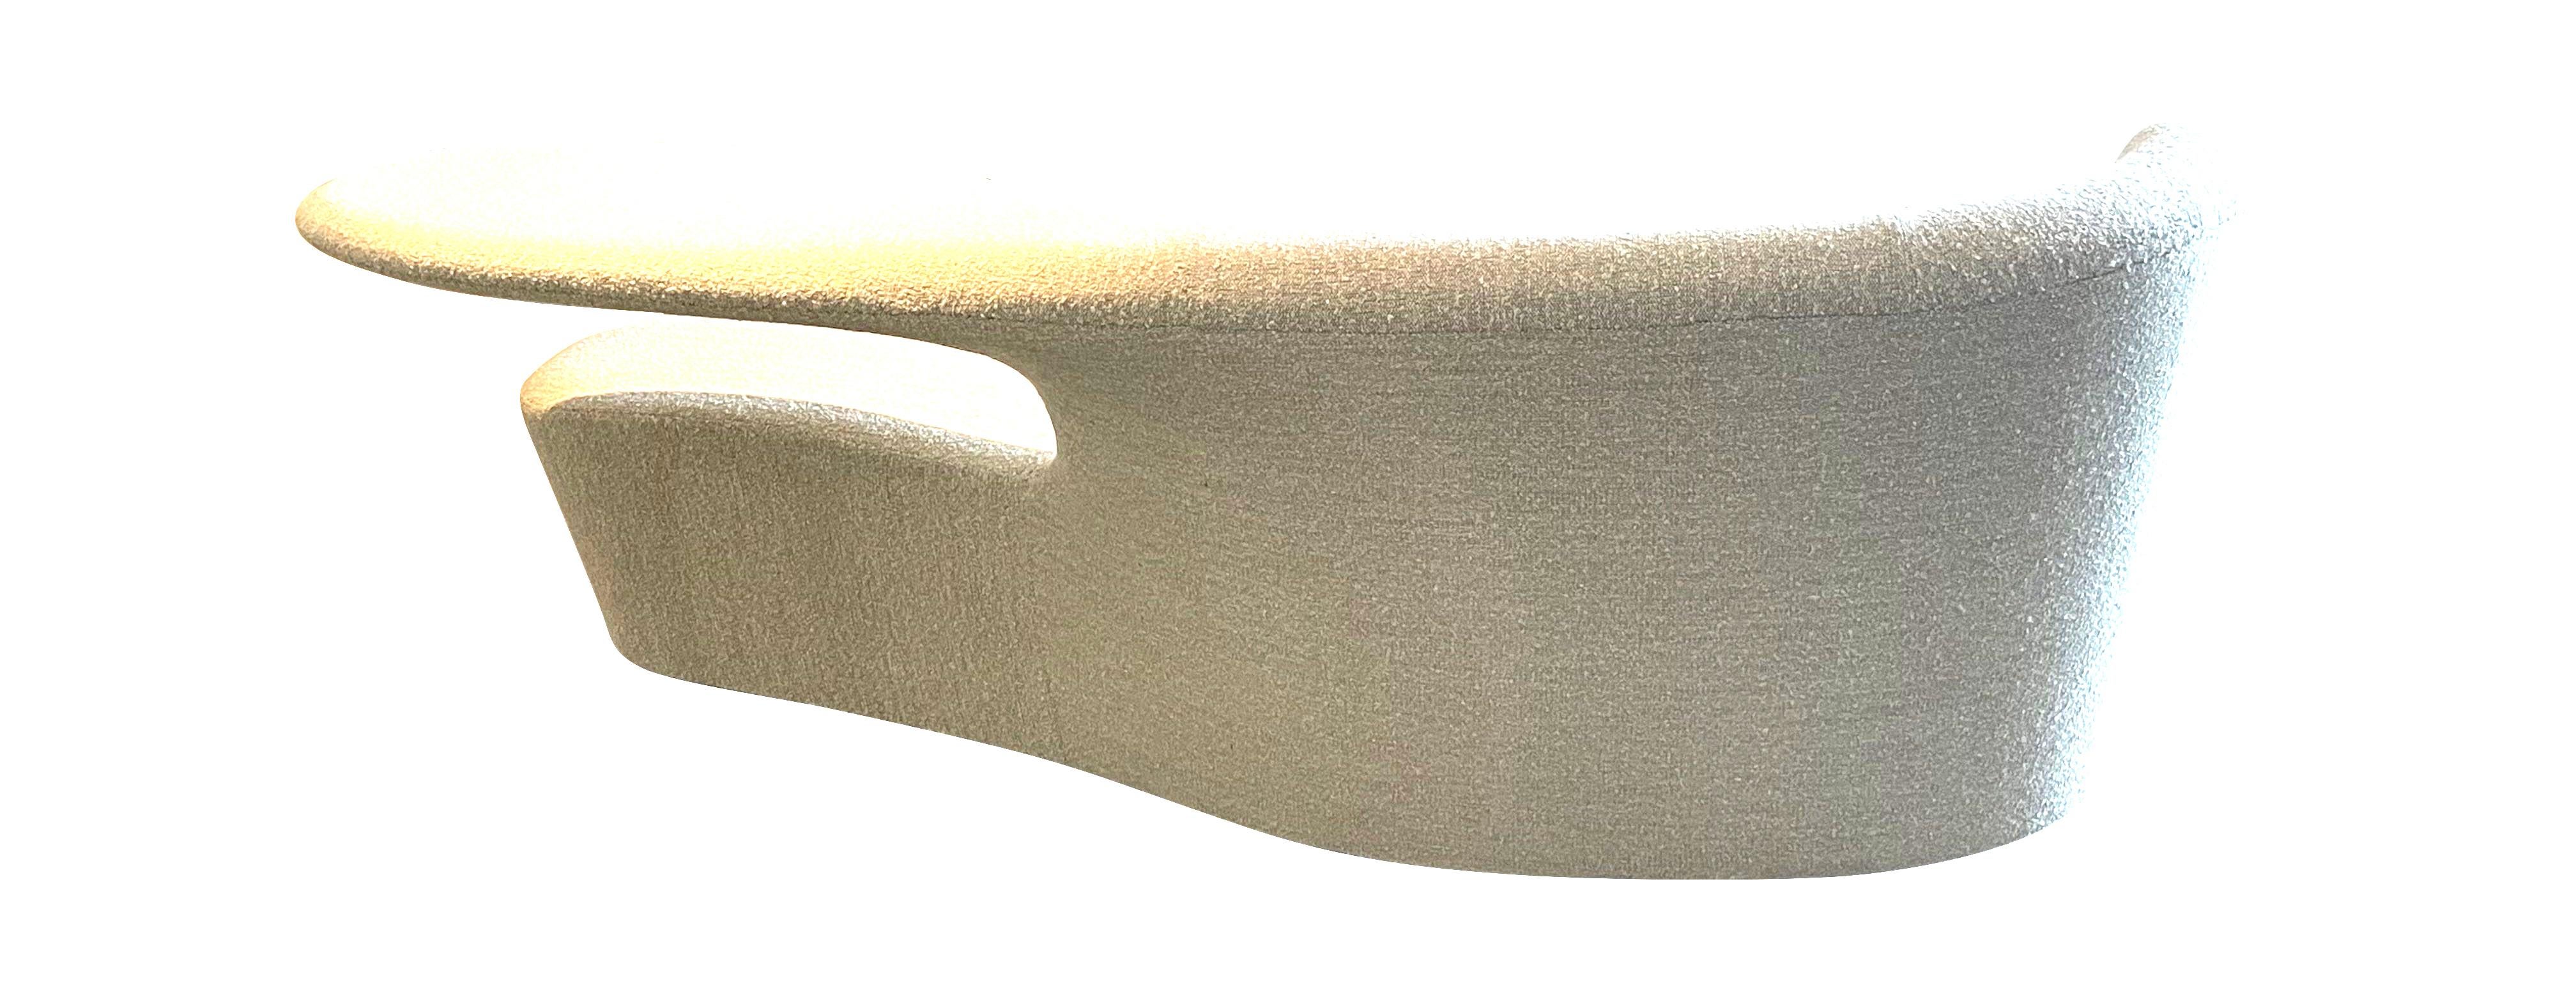 Upholstery Curved Sculptural Sofa, Spanish, 1980s For Sale